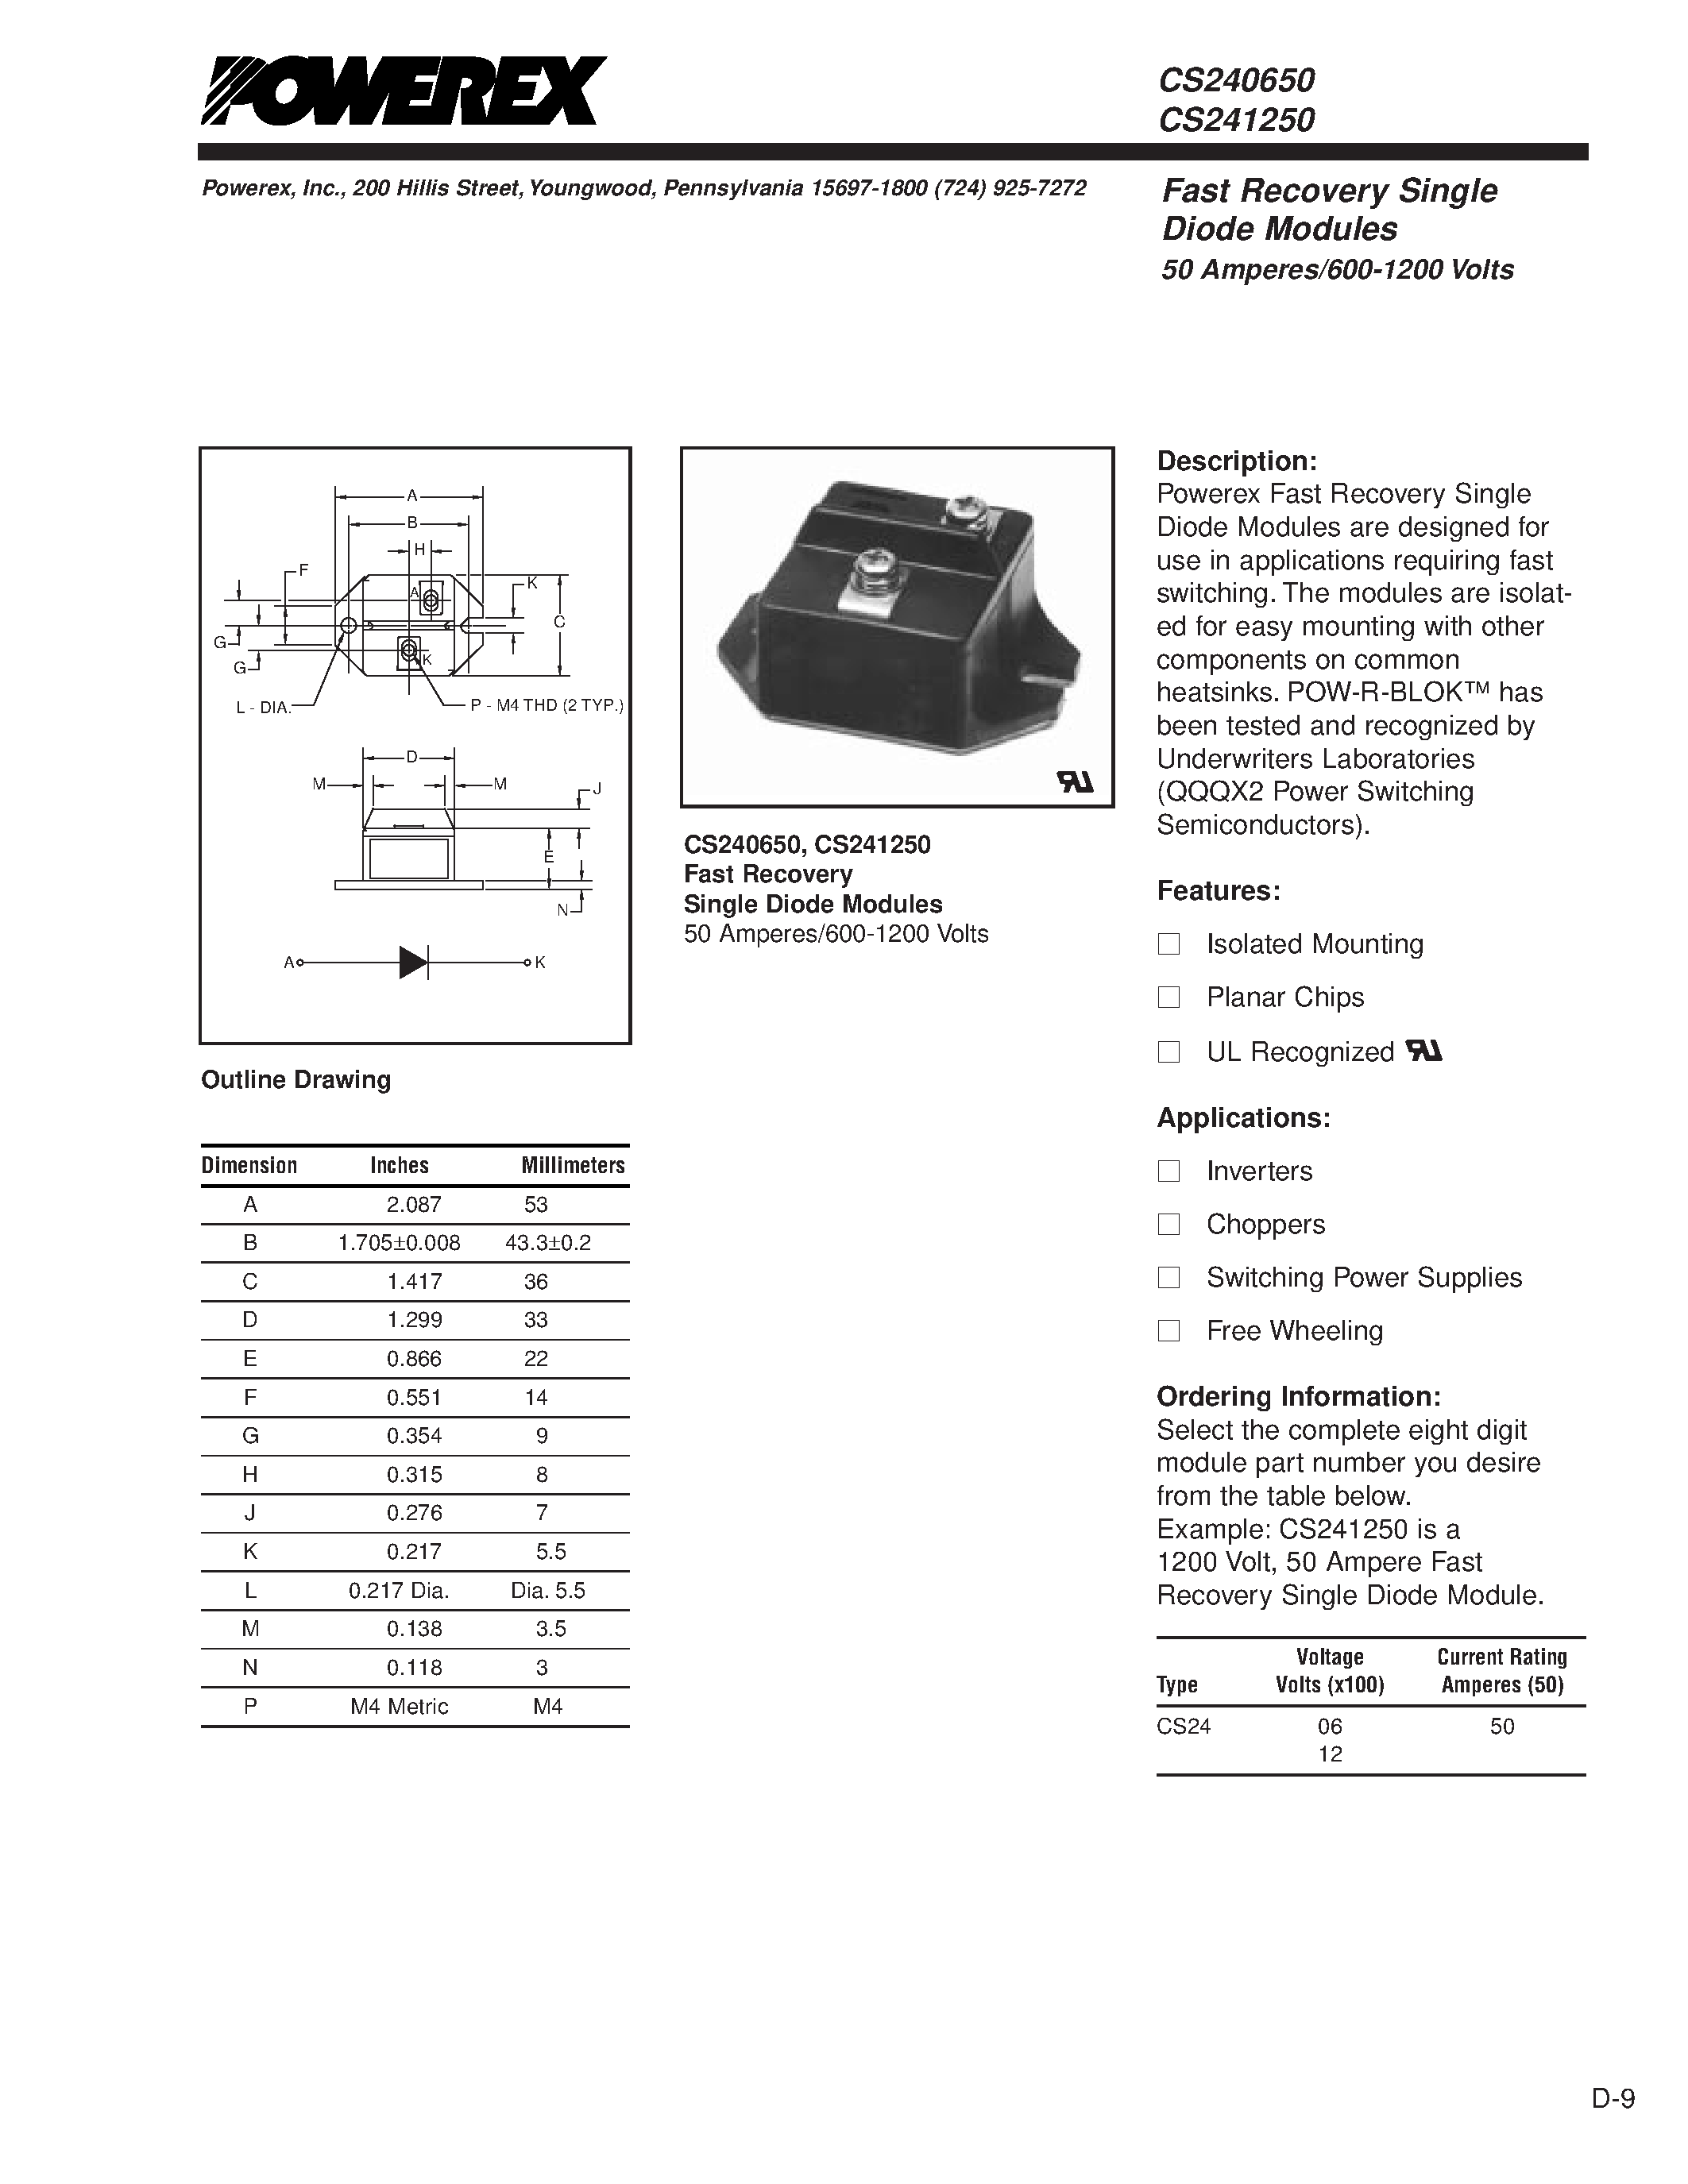 Datasheet CS241250 - Fast Recovery Single Diode Modules 50 Amperes/600-1200 Volts page 1